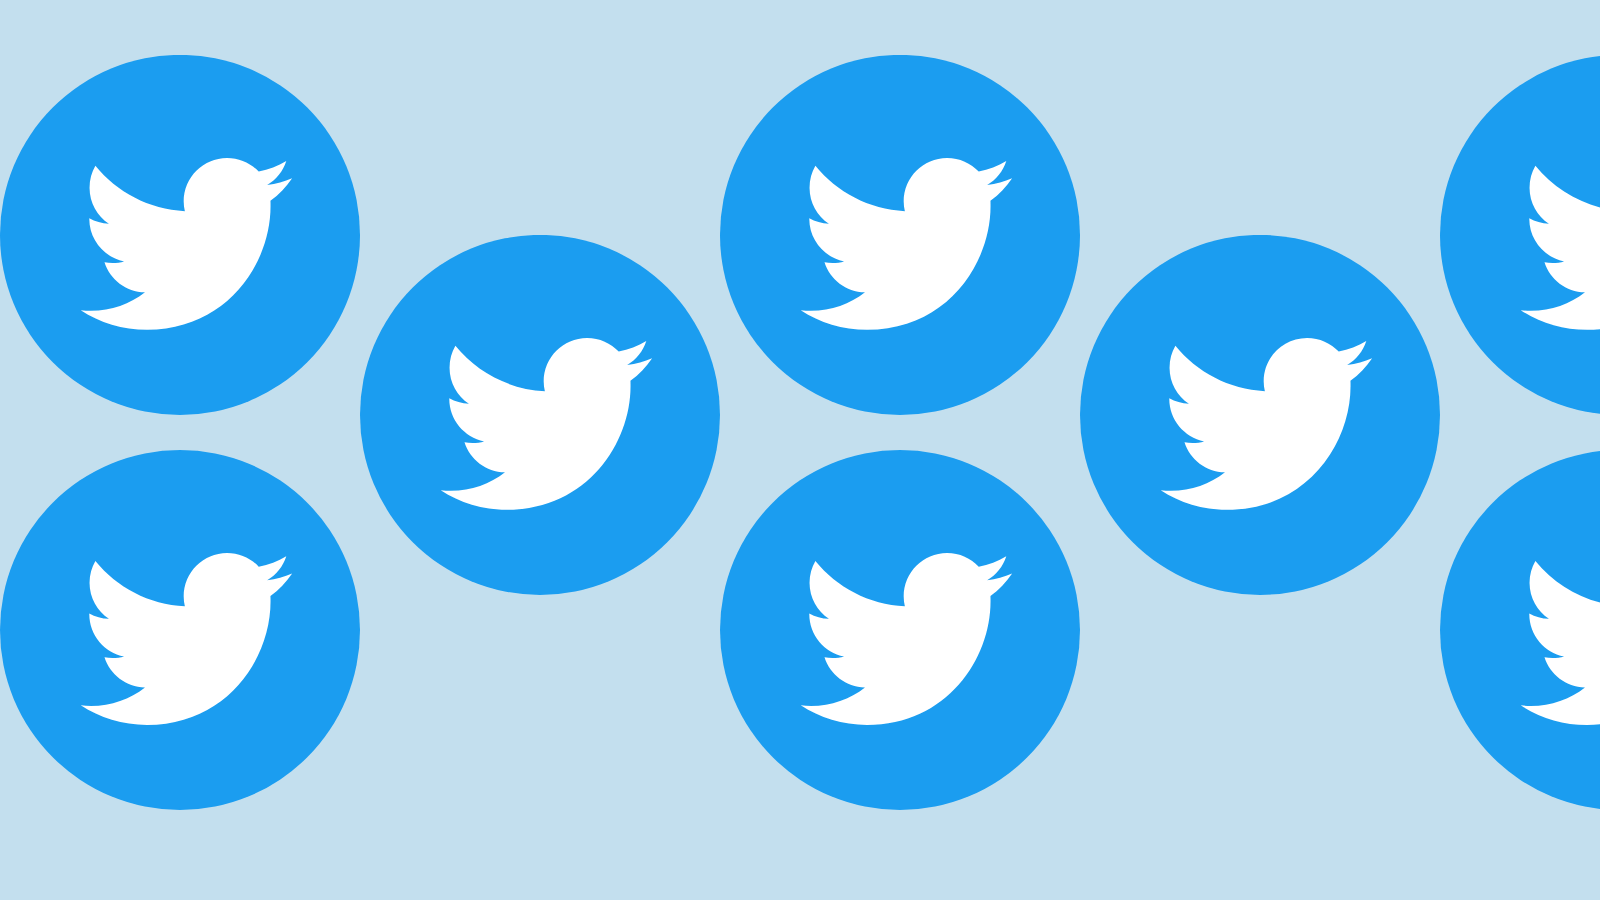 The Twitter logo in a repeating pattern